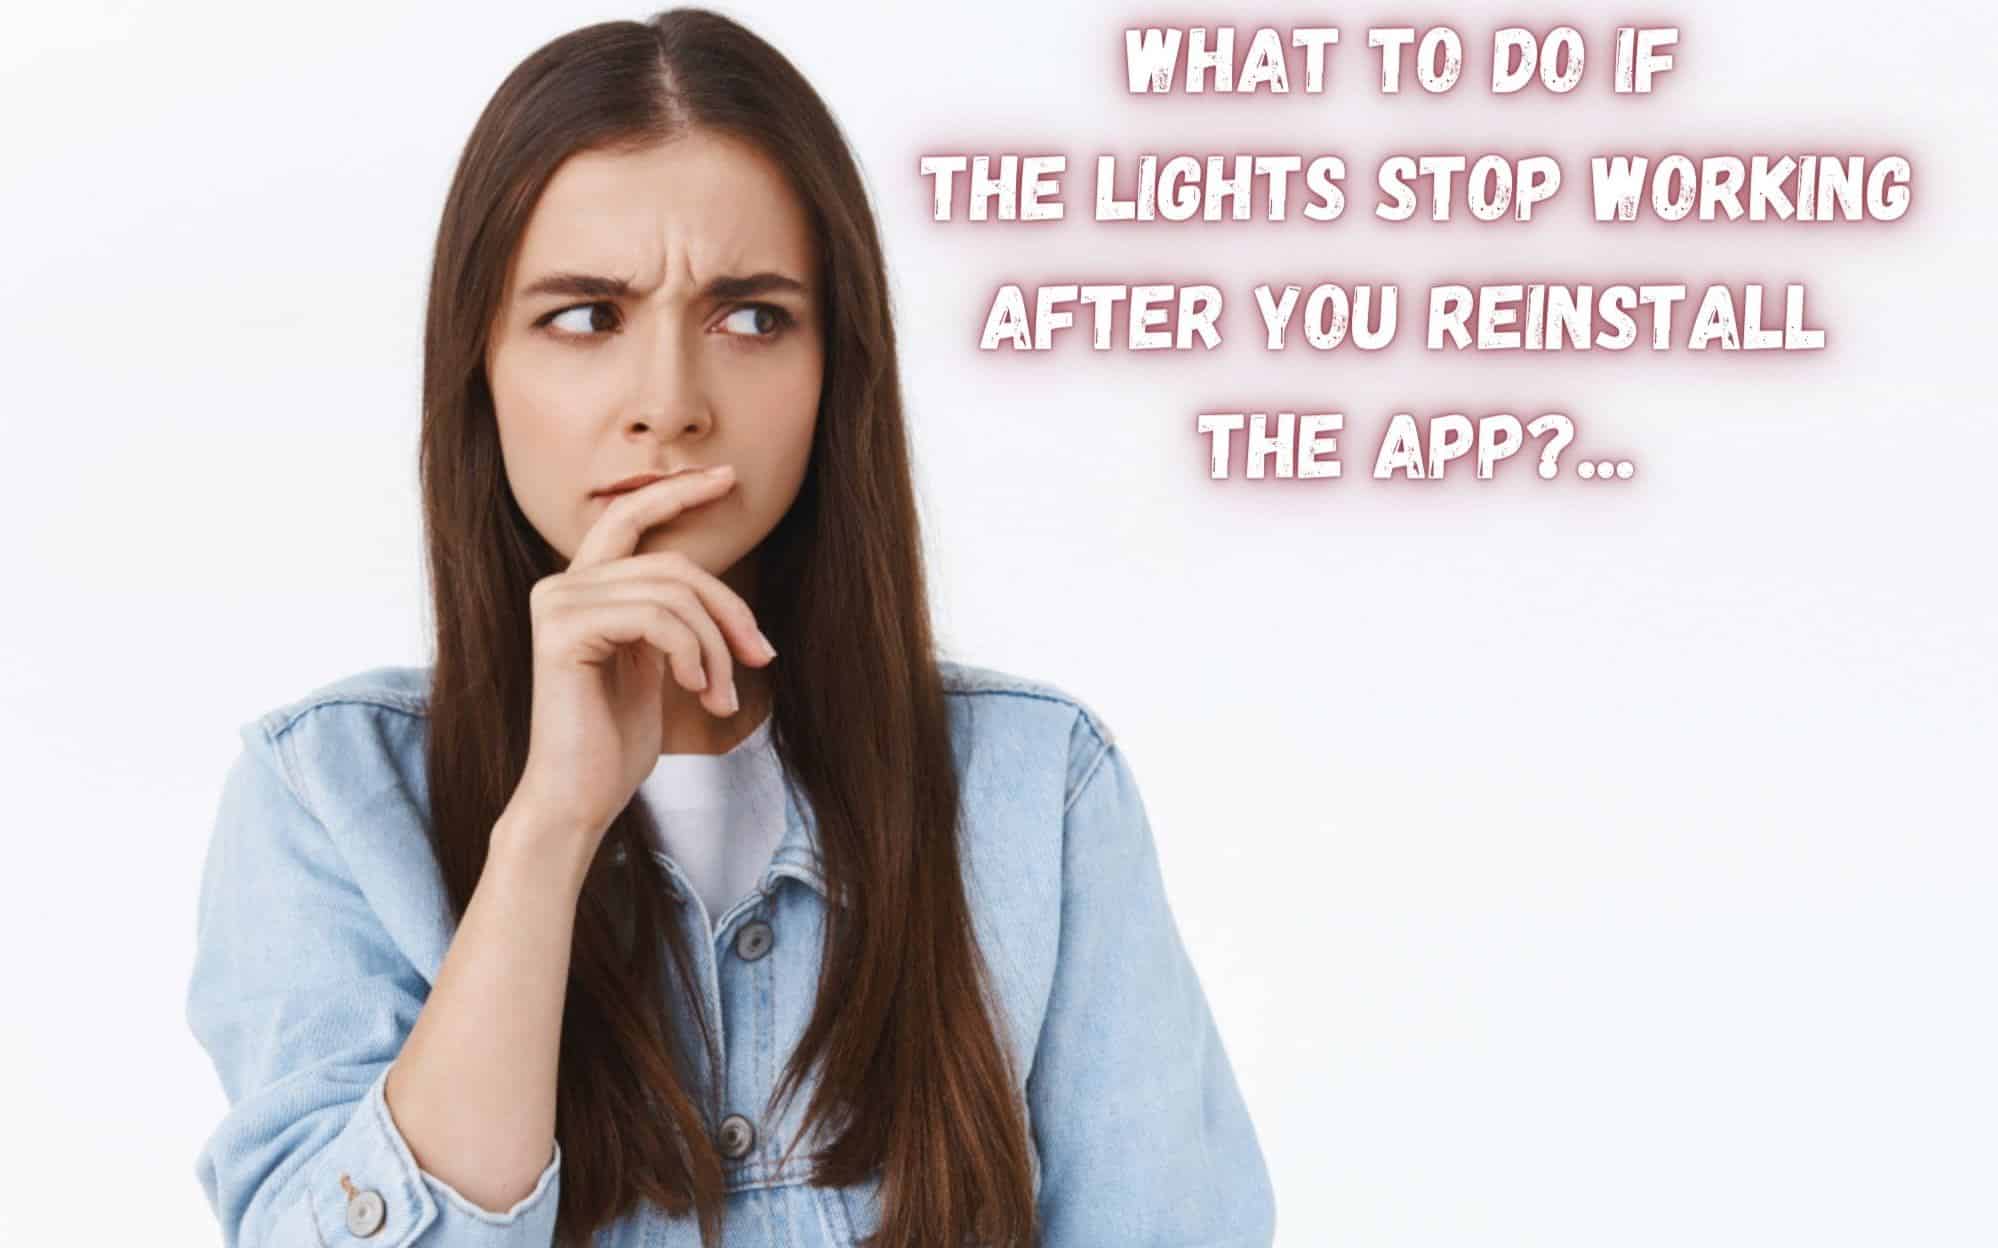 What to do if the lights stop working after you reinstall the app